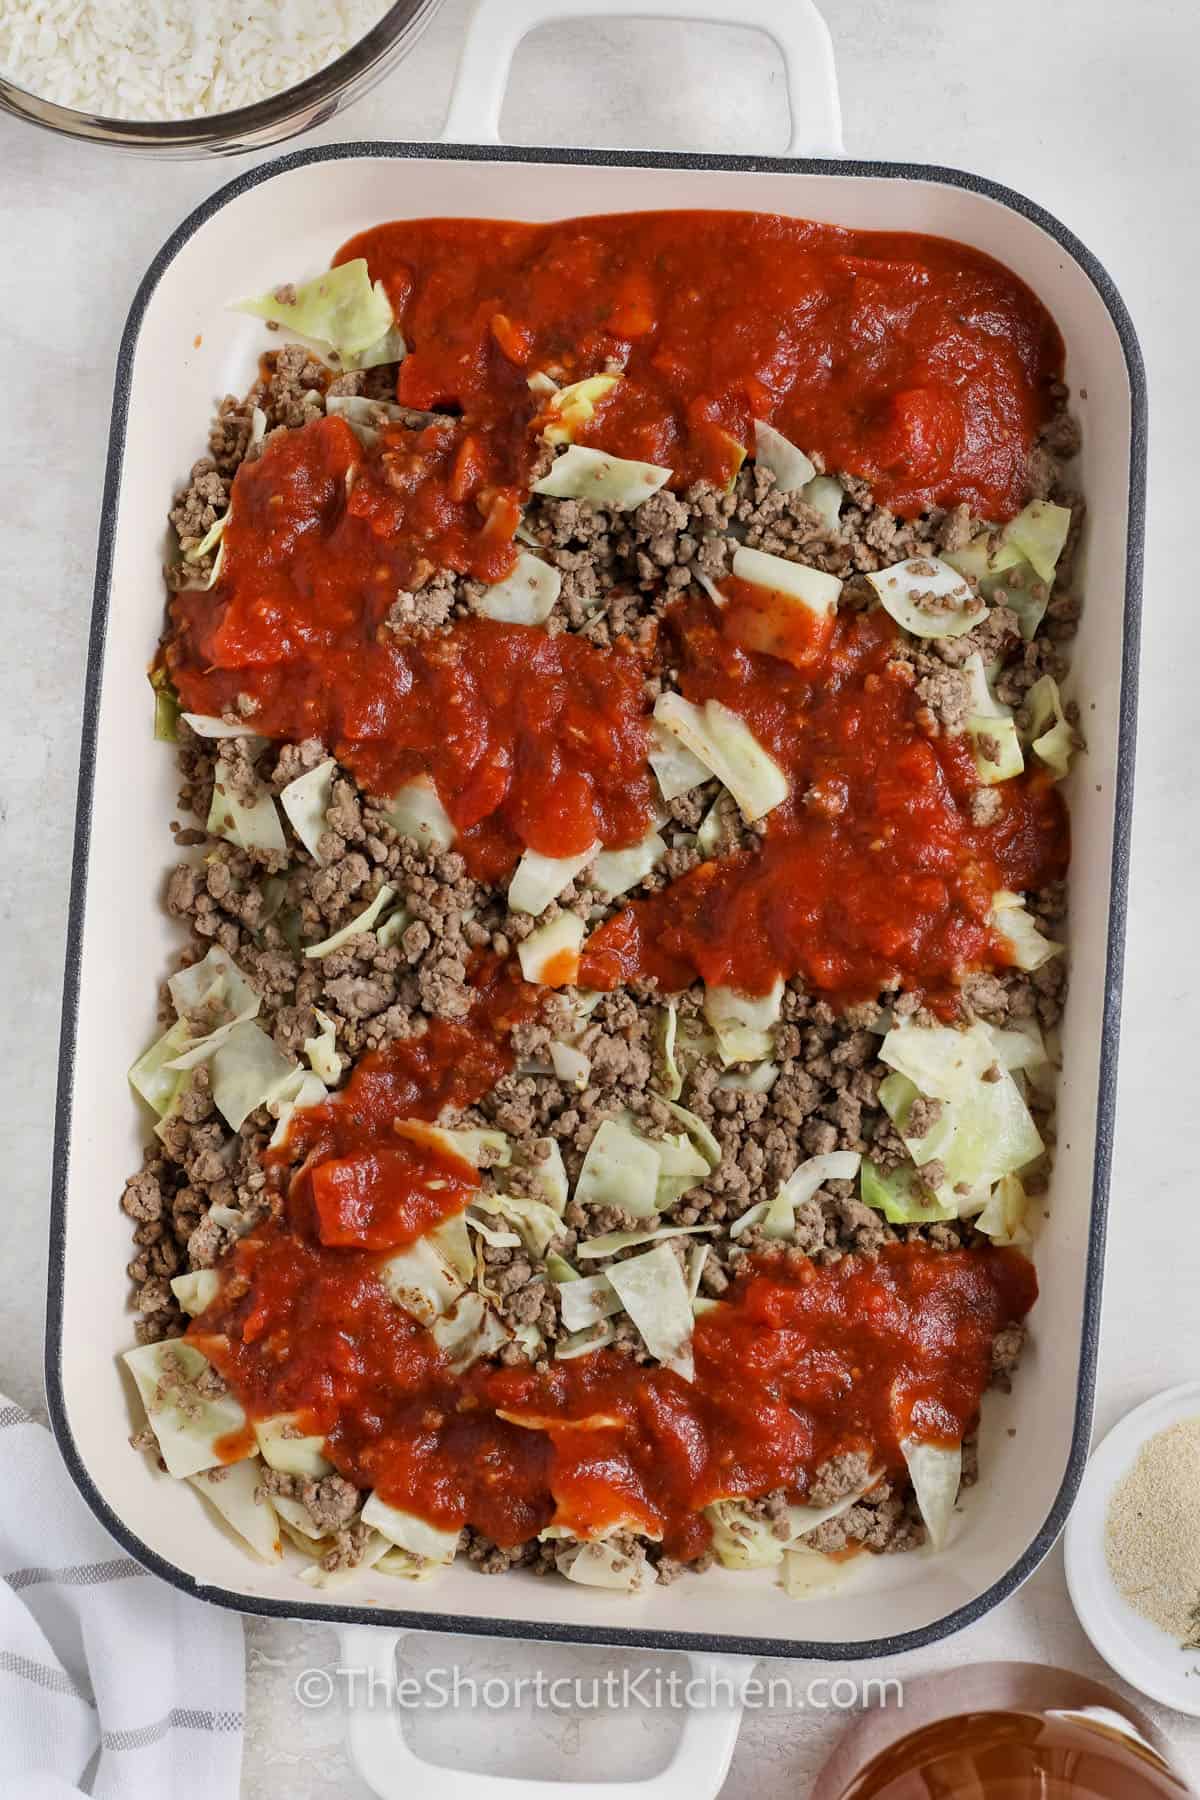 Ingredients to make Cabbage Roll Casserole in a casserole dish